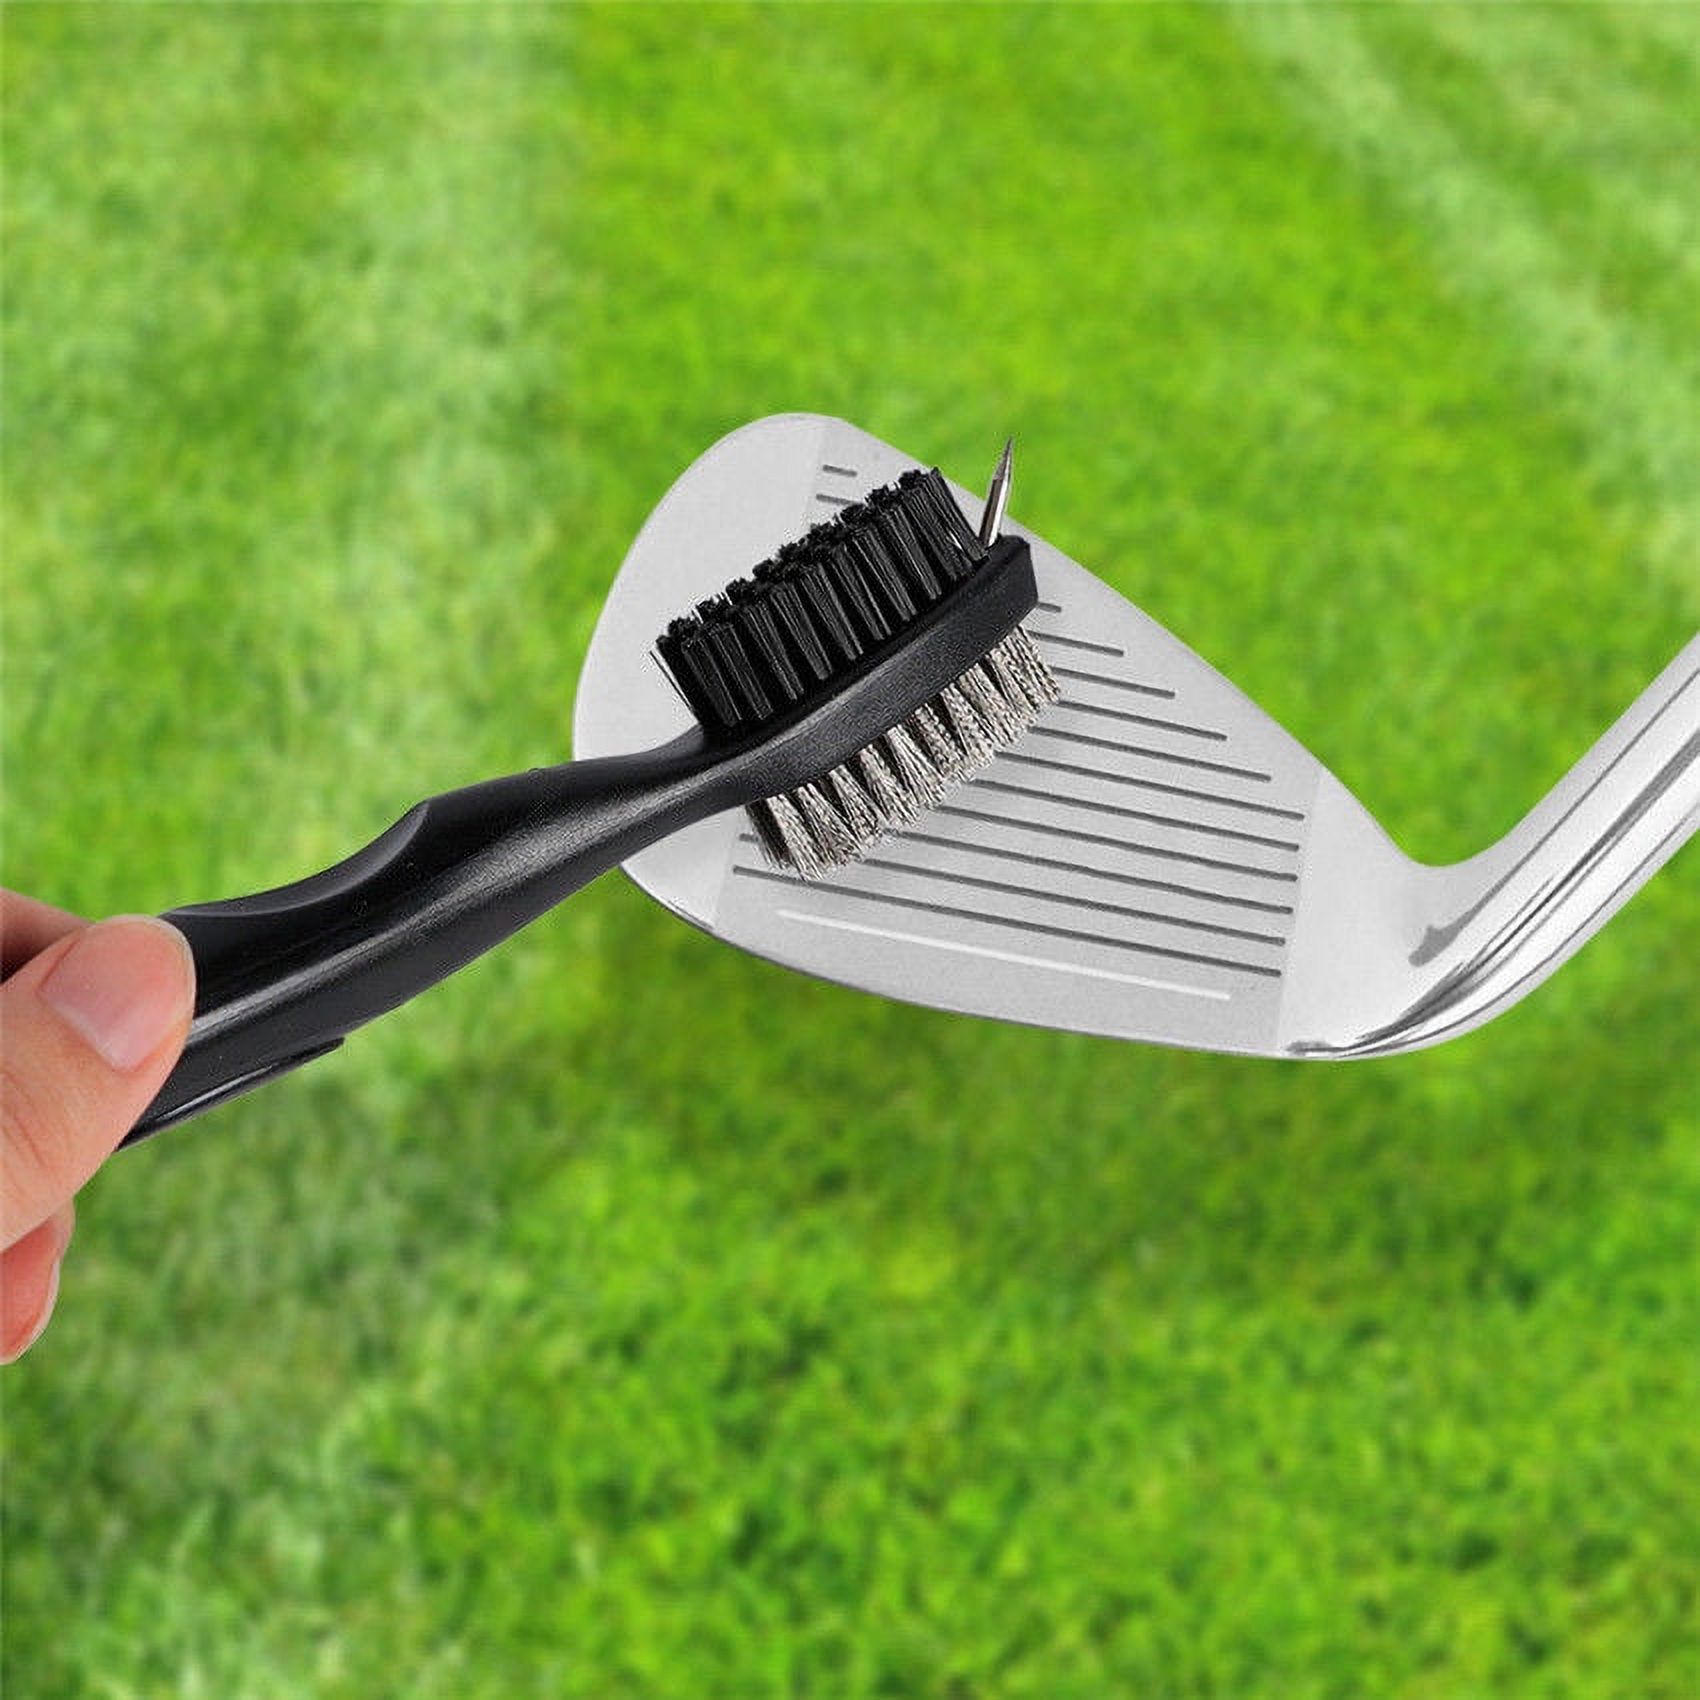 Golf Brushes - Golf Club Cleaning Brush 2 Sided Retractable Tool Club Cleaner ( Black ) - image 3 of 3